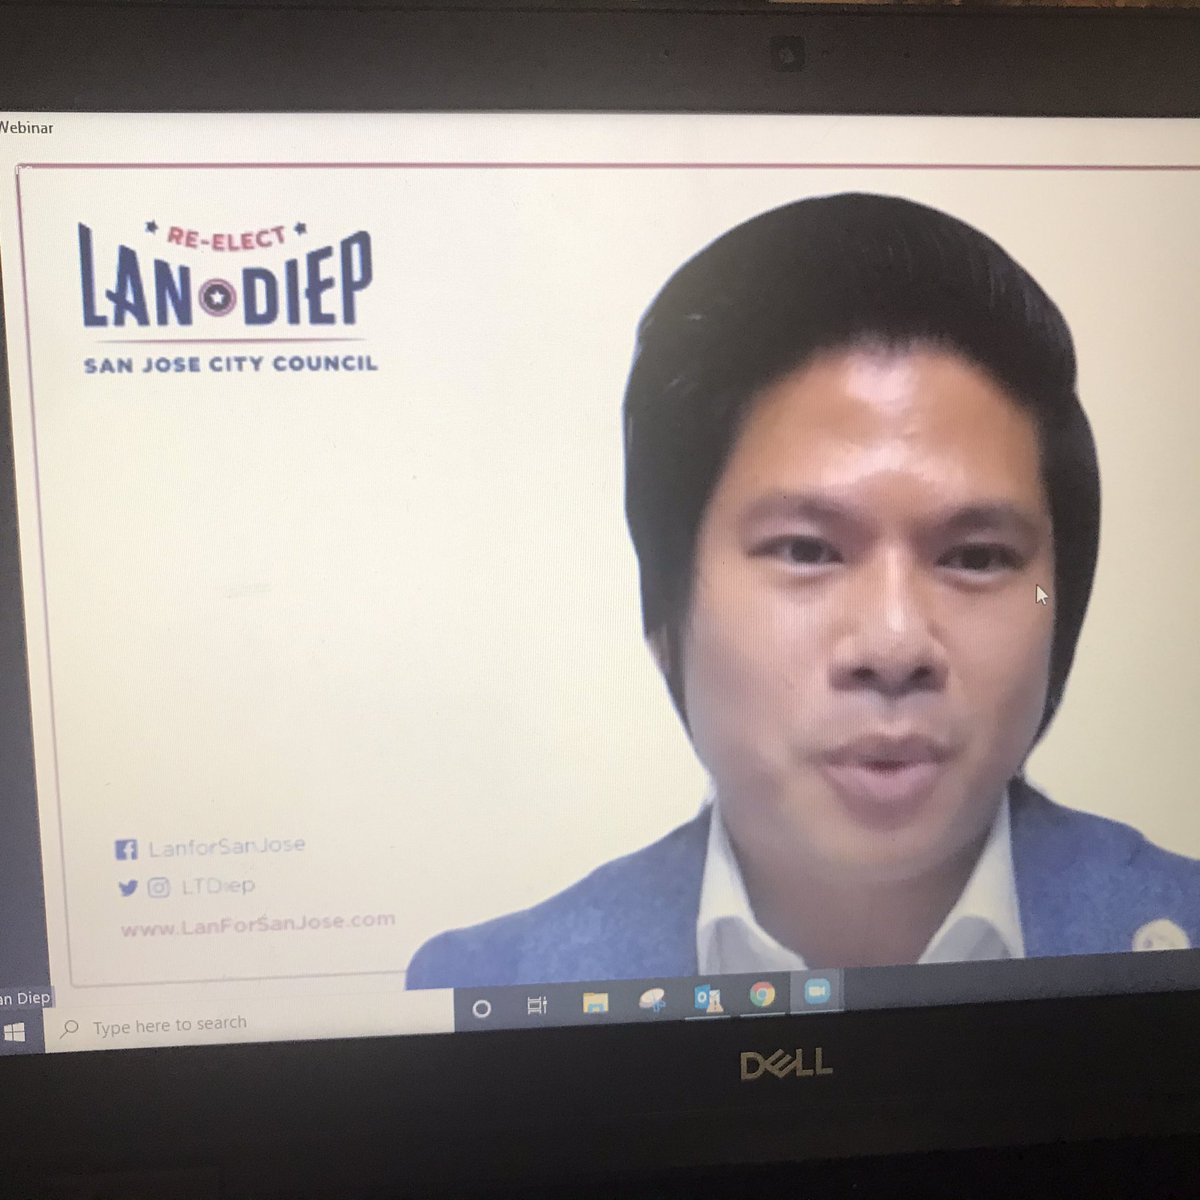 Lan Diep: People don’t understand how government works and I am proud that I help people understand what is realistic and what is not the City’s role.